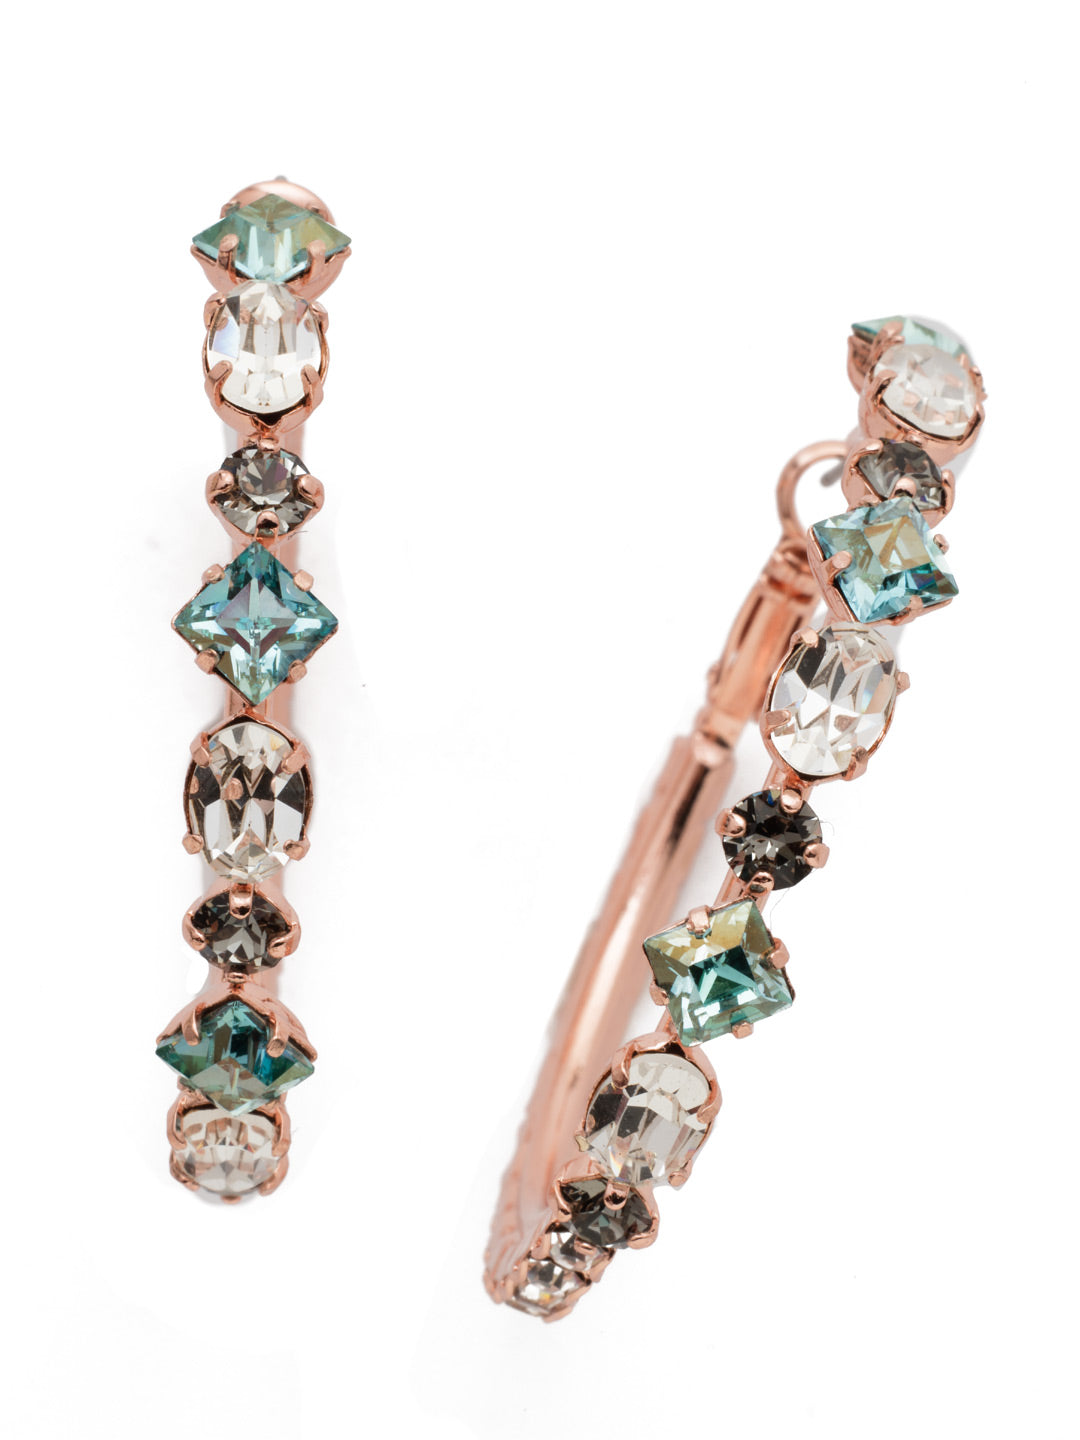 Sicily Hoop Earrings - EEA23RGCAZ - These hoop earrings are packed with sparkle, lined with a beautiful assortment of crystals. From Sorrelli's Crystal Azure collection in our Rose Gold-tone finish.